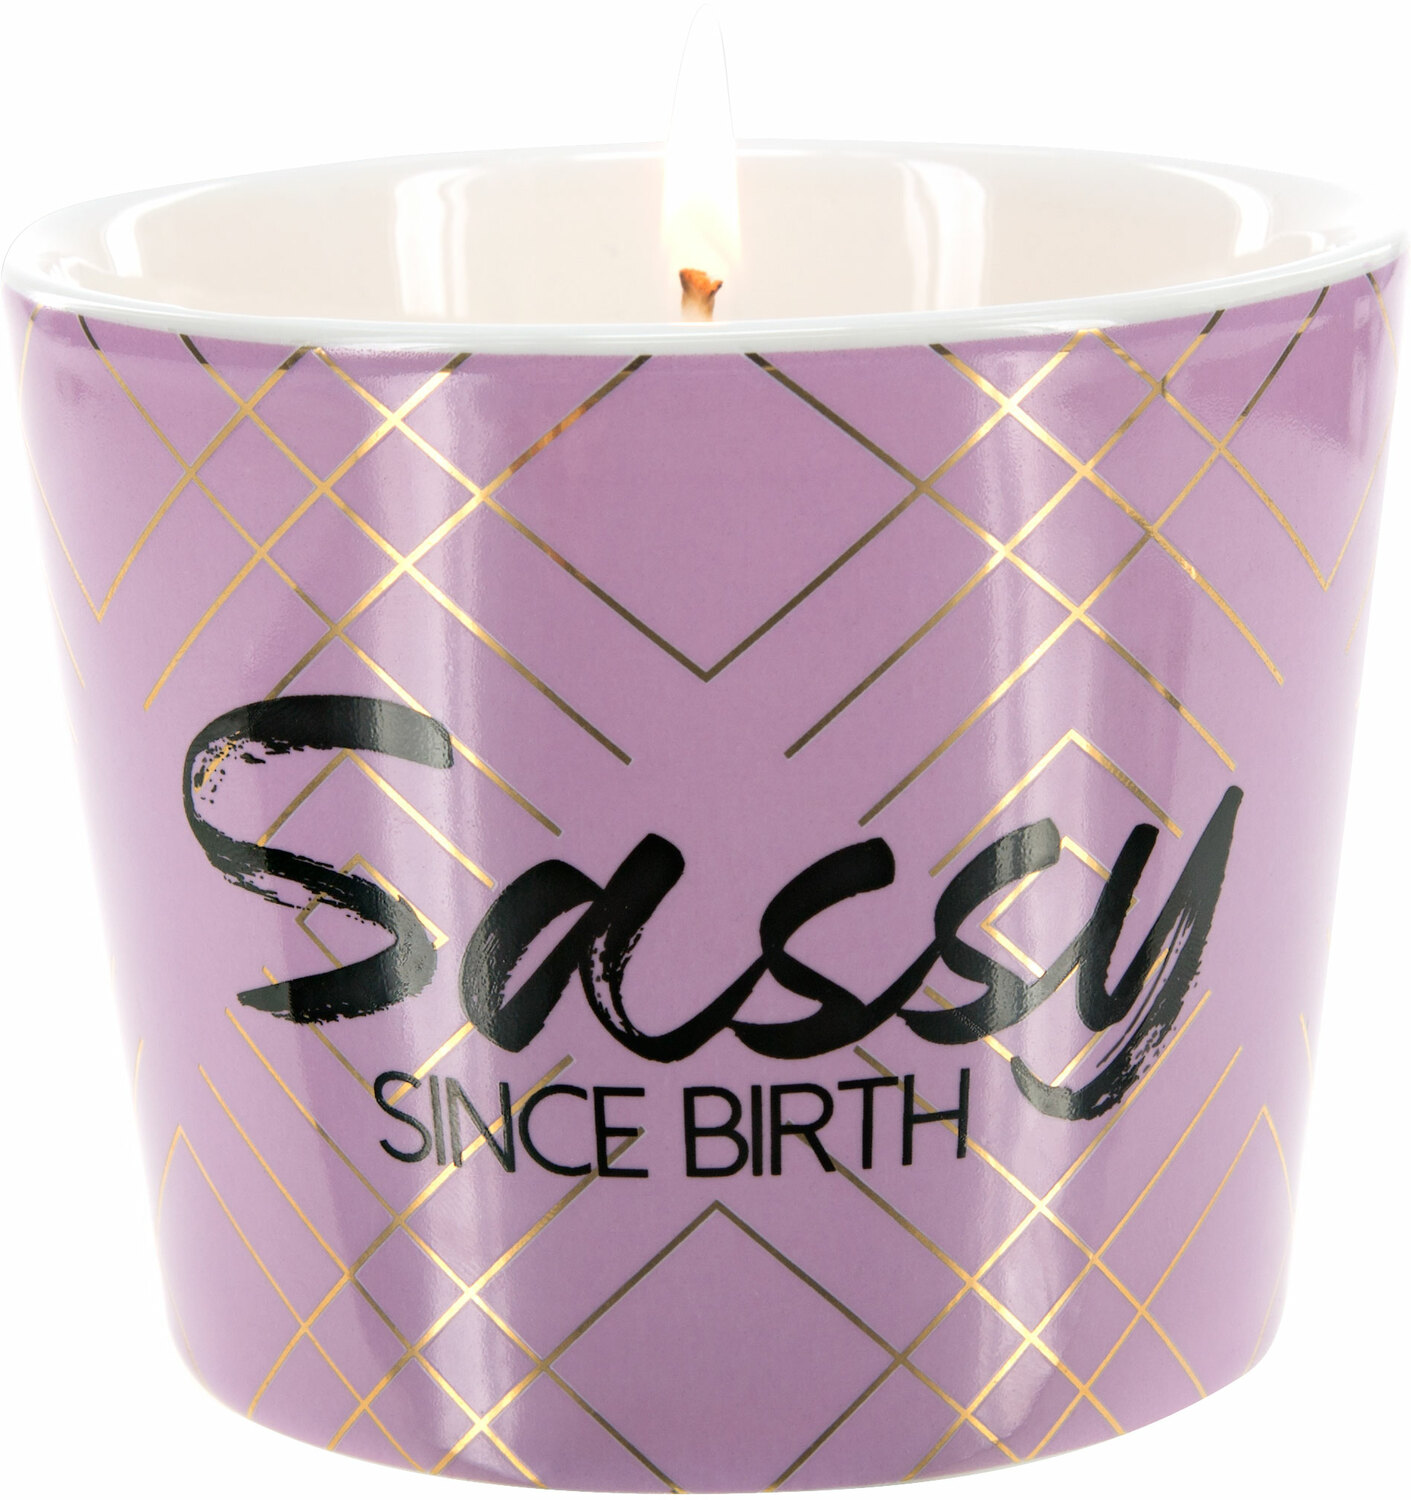 Sassy by Salty Celebration - Sassy - 8 oz Soy Wax Candle
Scent: Tranquility